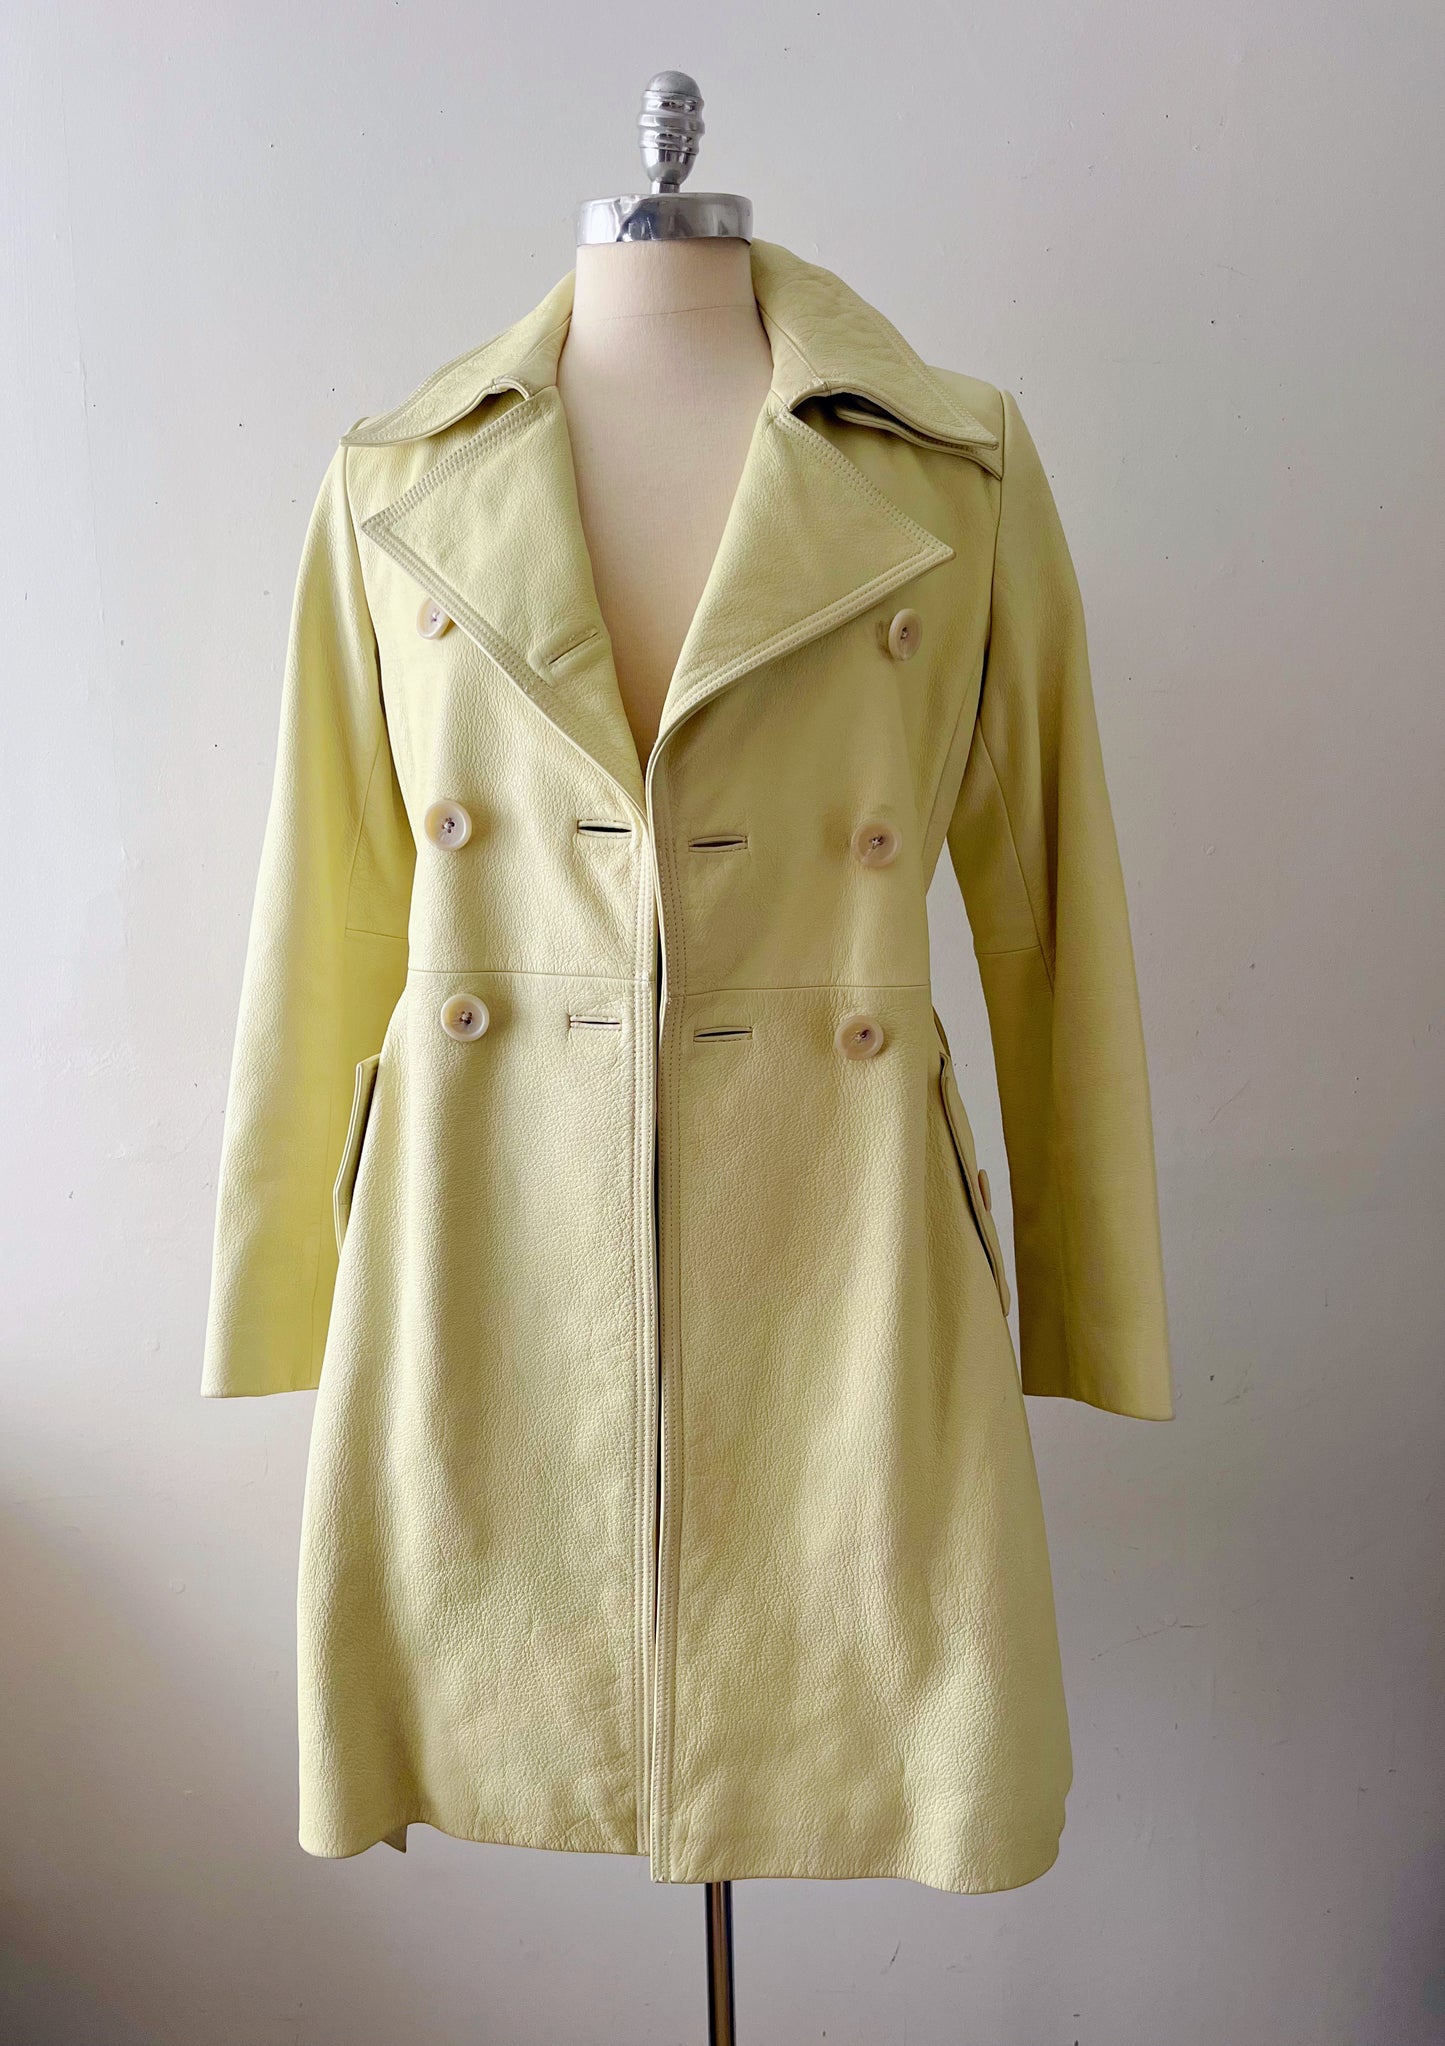 Lemon Lime Leather Trench Coat